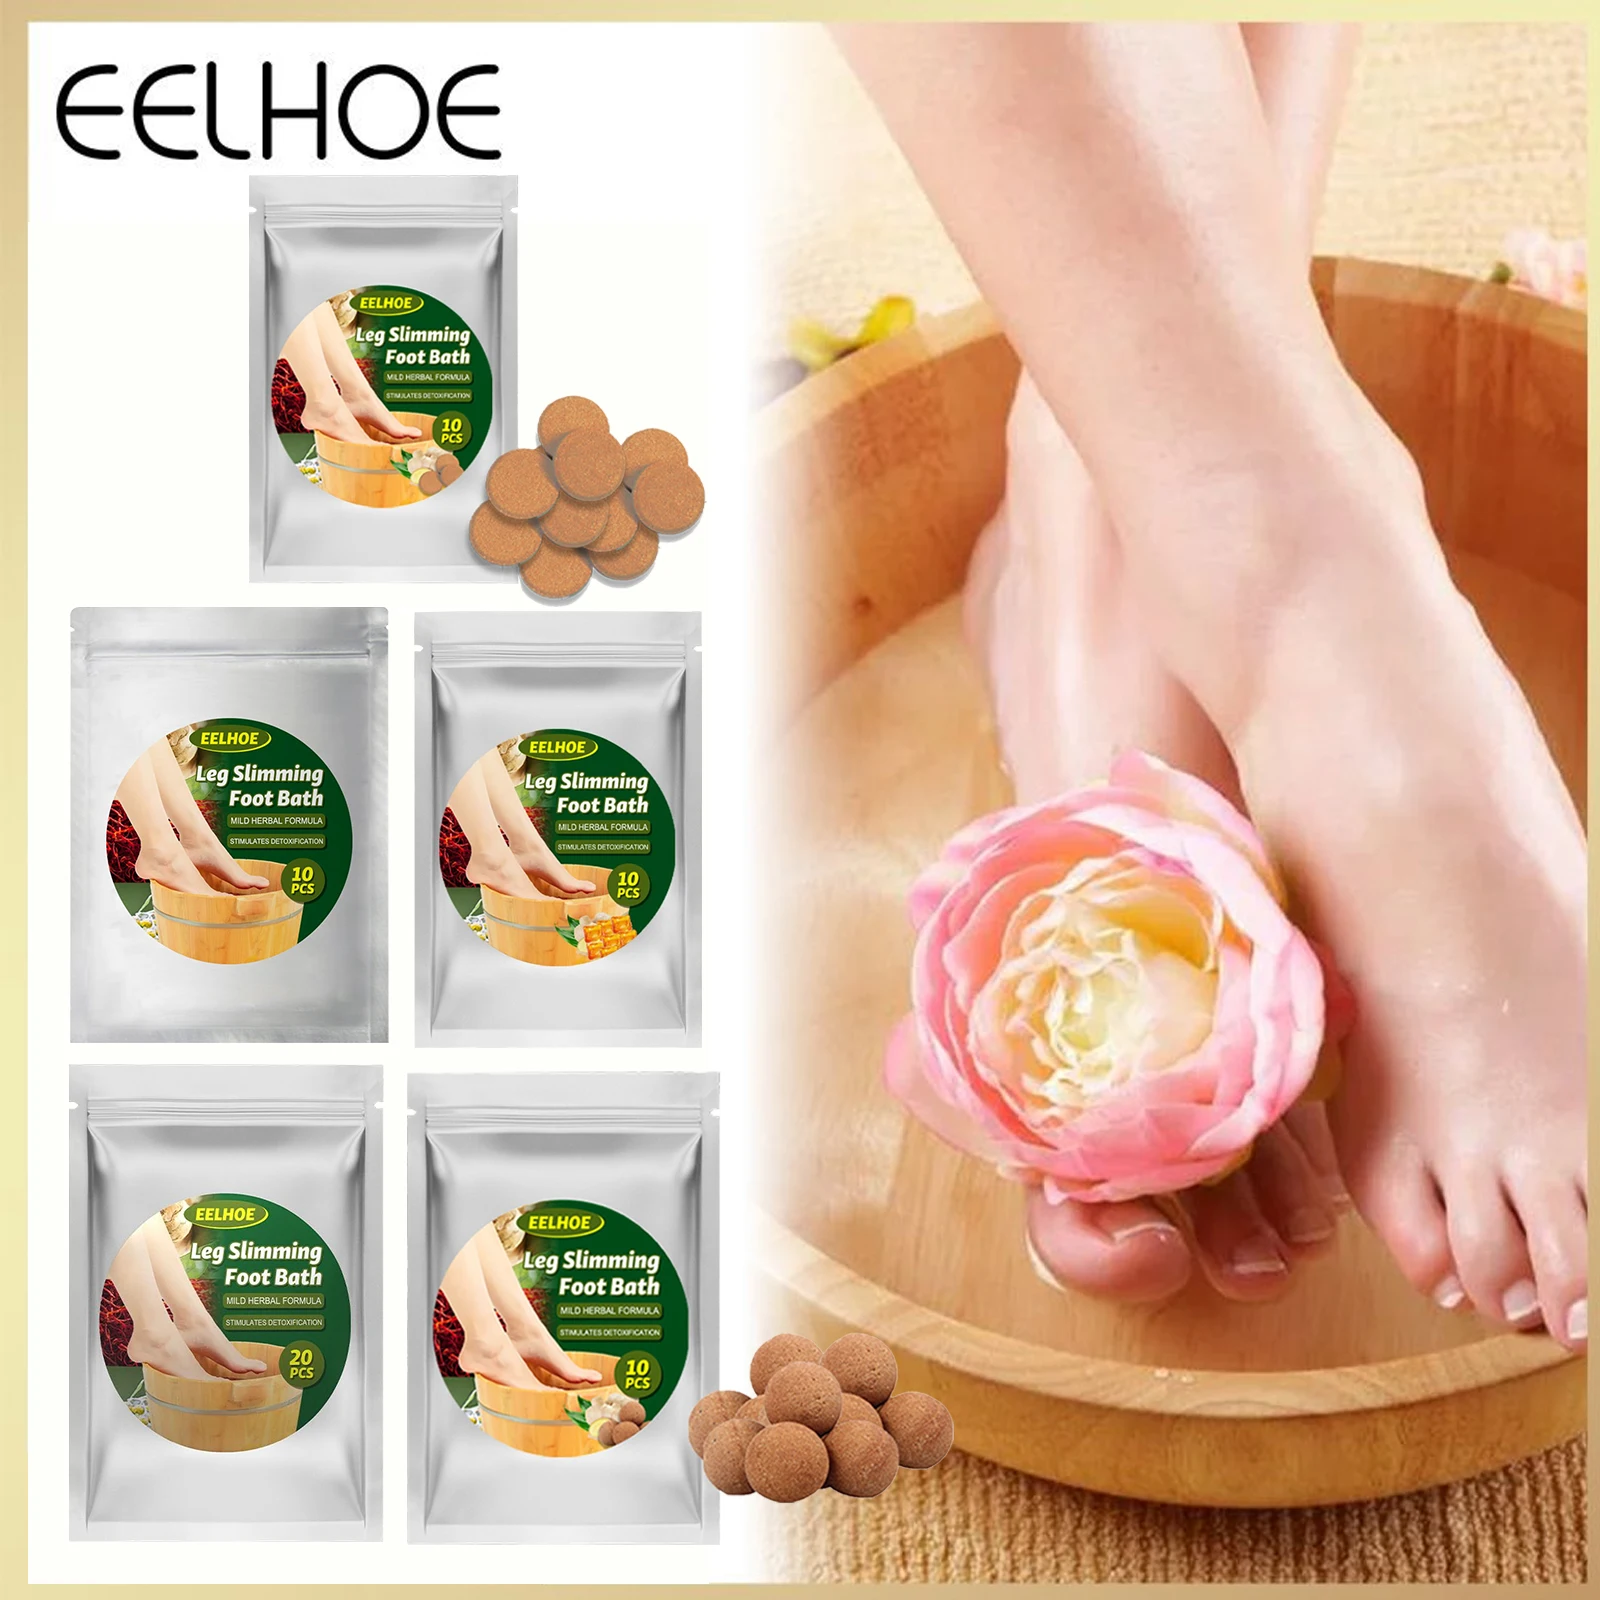 

Eelhoe Wormwood Foot Bath Chinese Medicine Bag Ginger Detox To Relieve Calf Muscles and Drive Away Cold Slimming Body Foot Care